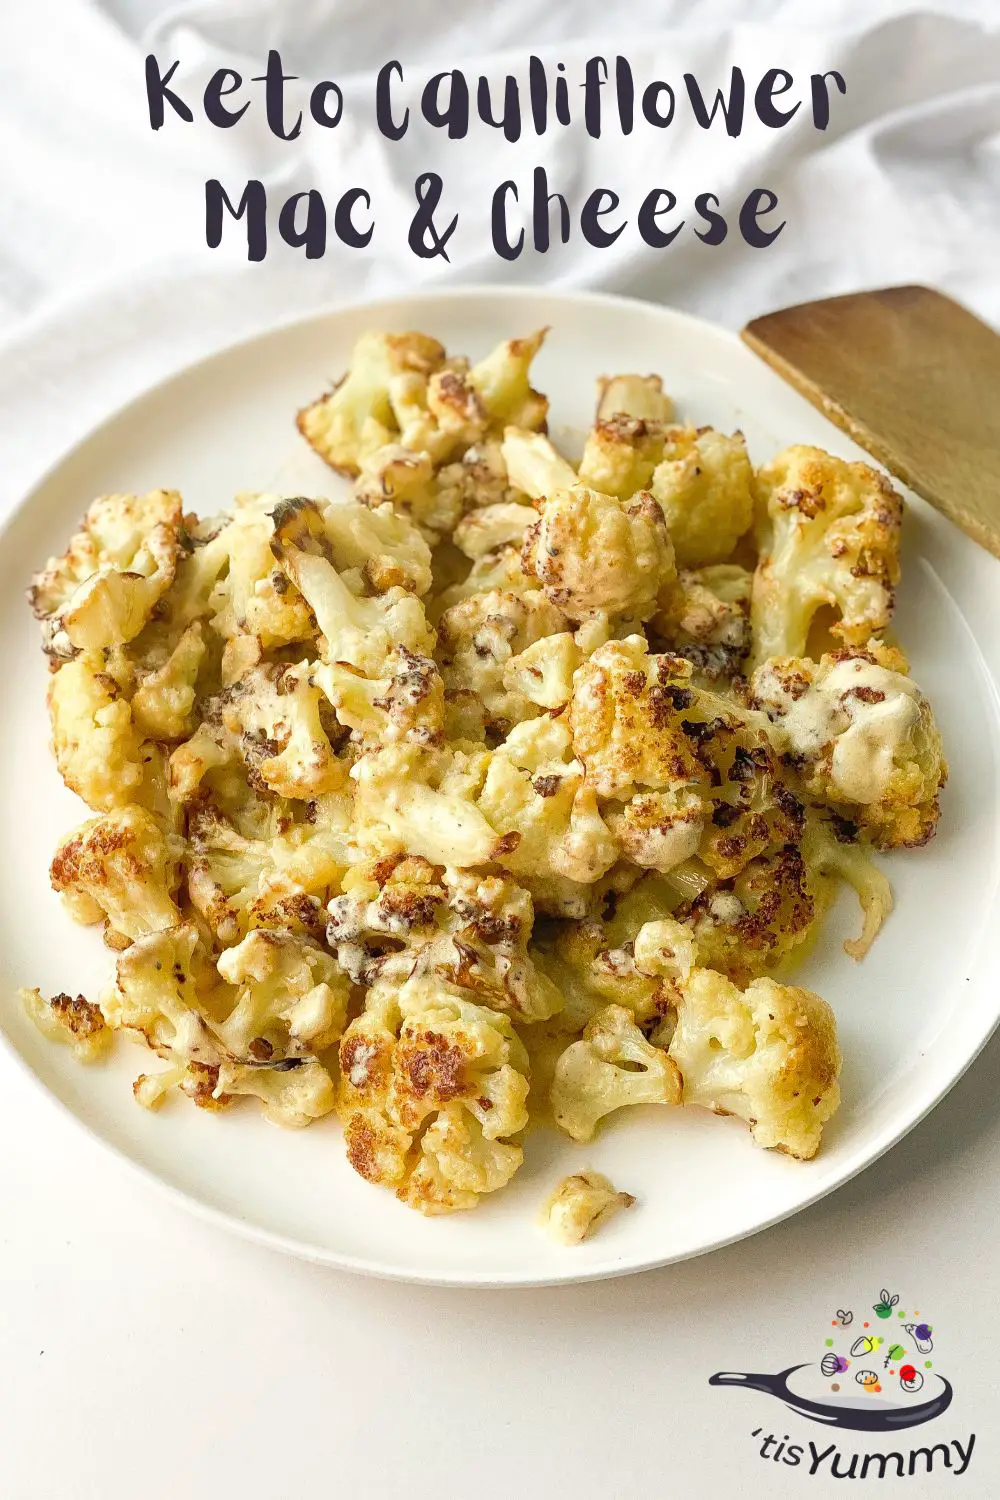 keto cauliflower mac and cheese on a plate with a wooden spoon